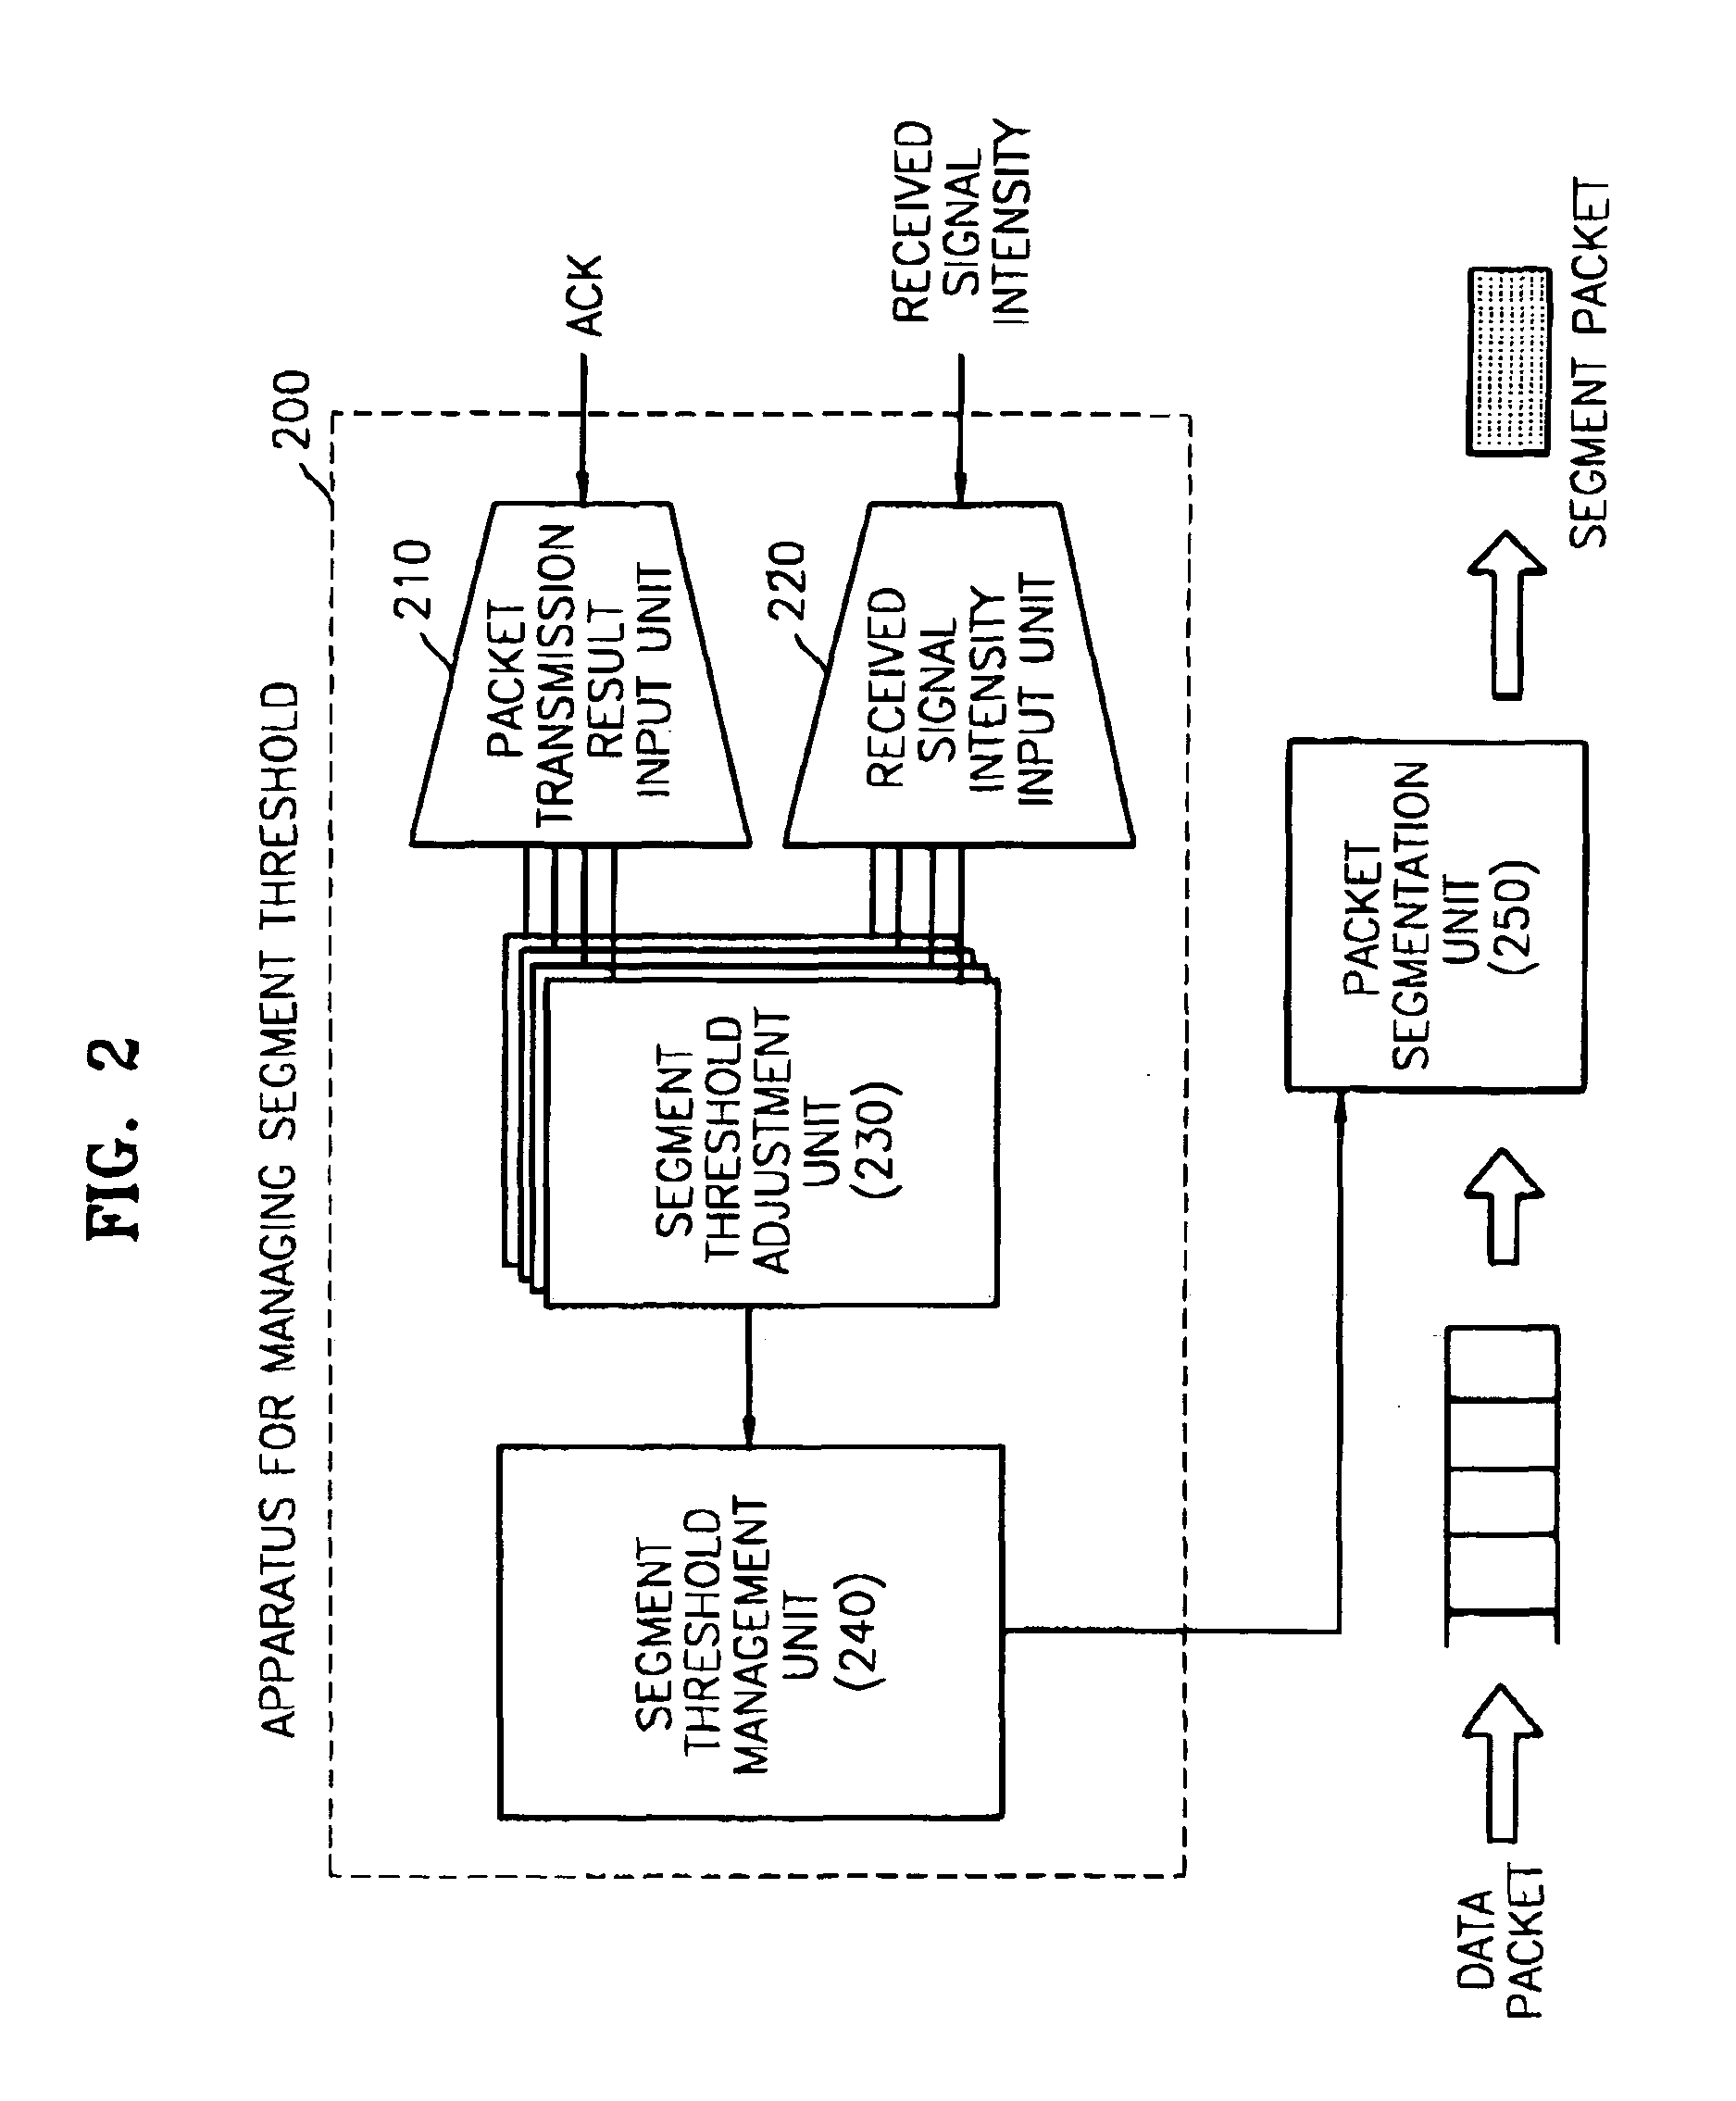 Method and apparatus for dynamically managing a packet segment threshold according to a wireless channel state